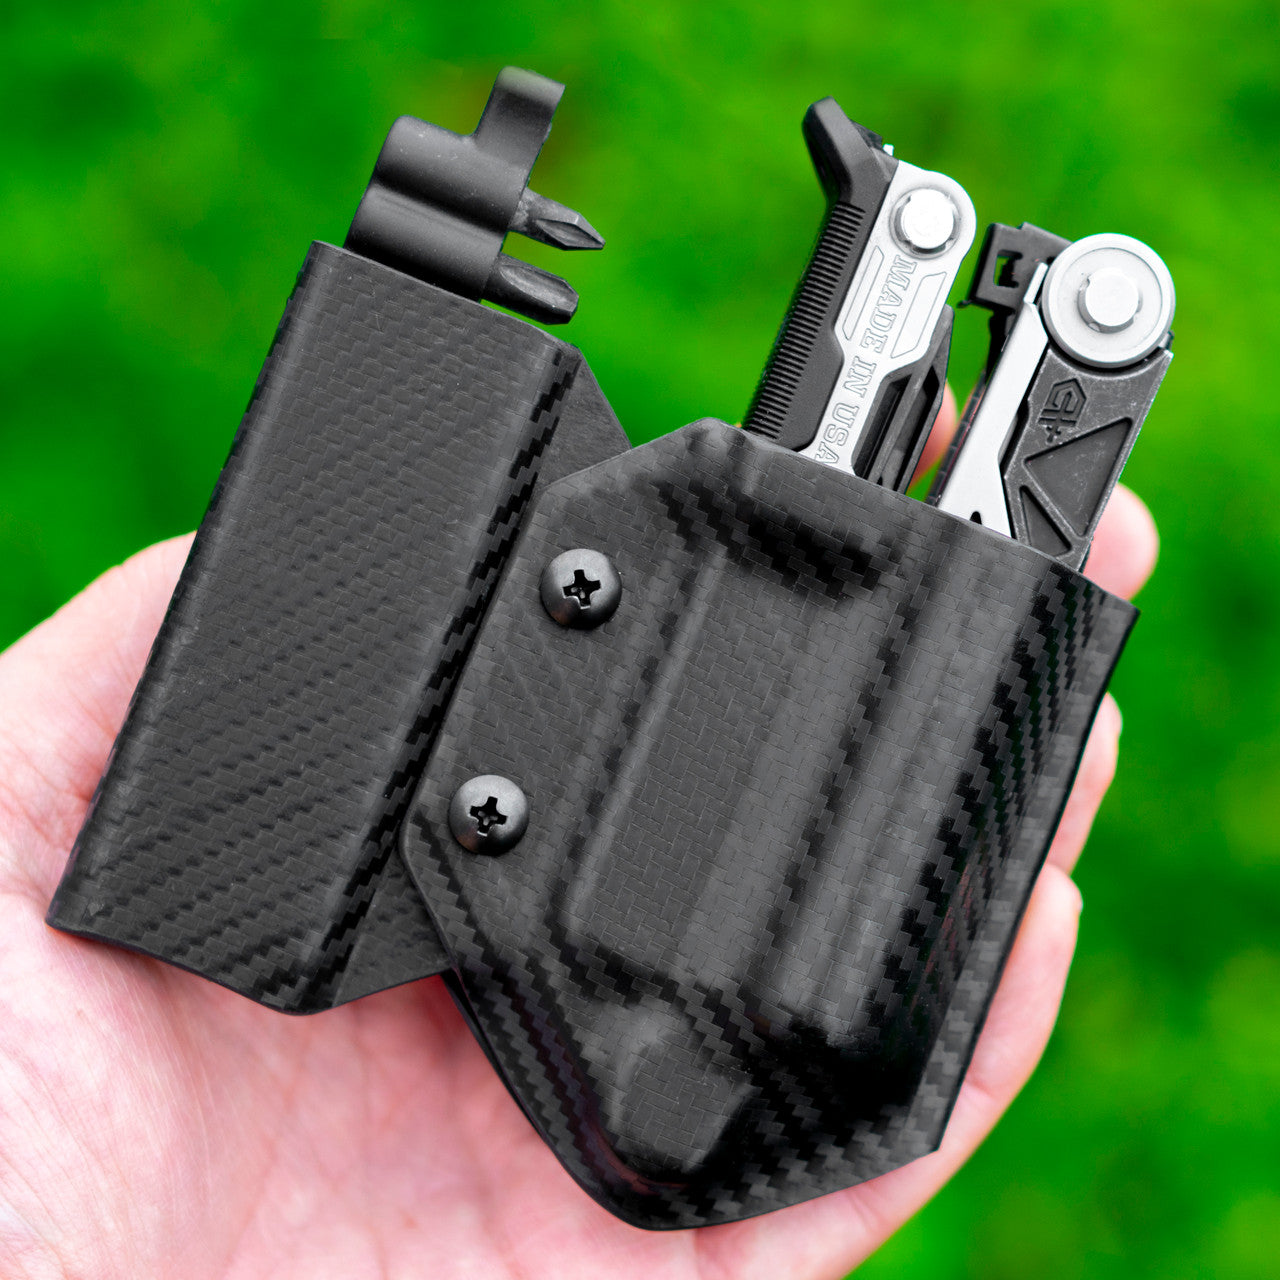 Kydex Sheath for the Gerber Center-Drive w/ Bit Sidecar Clip & Carry